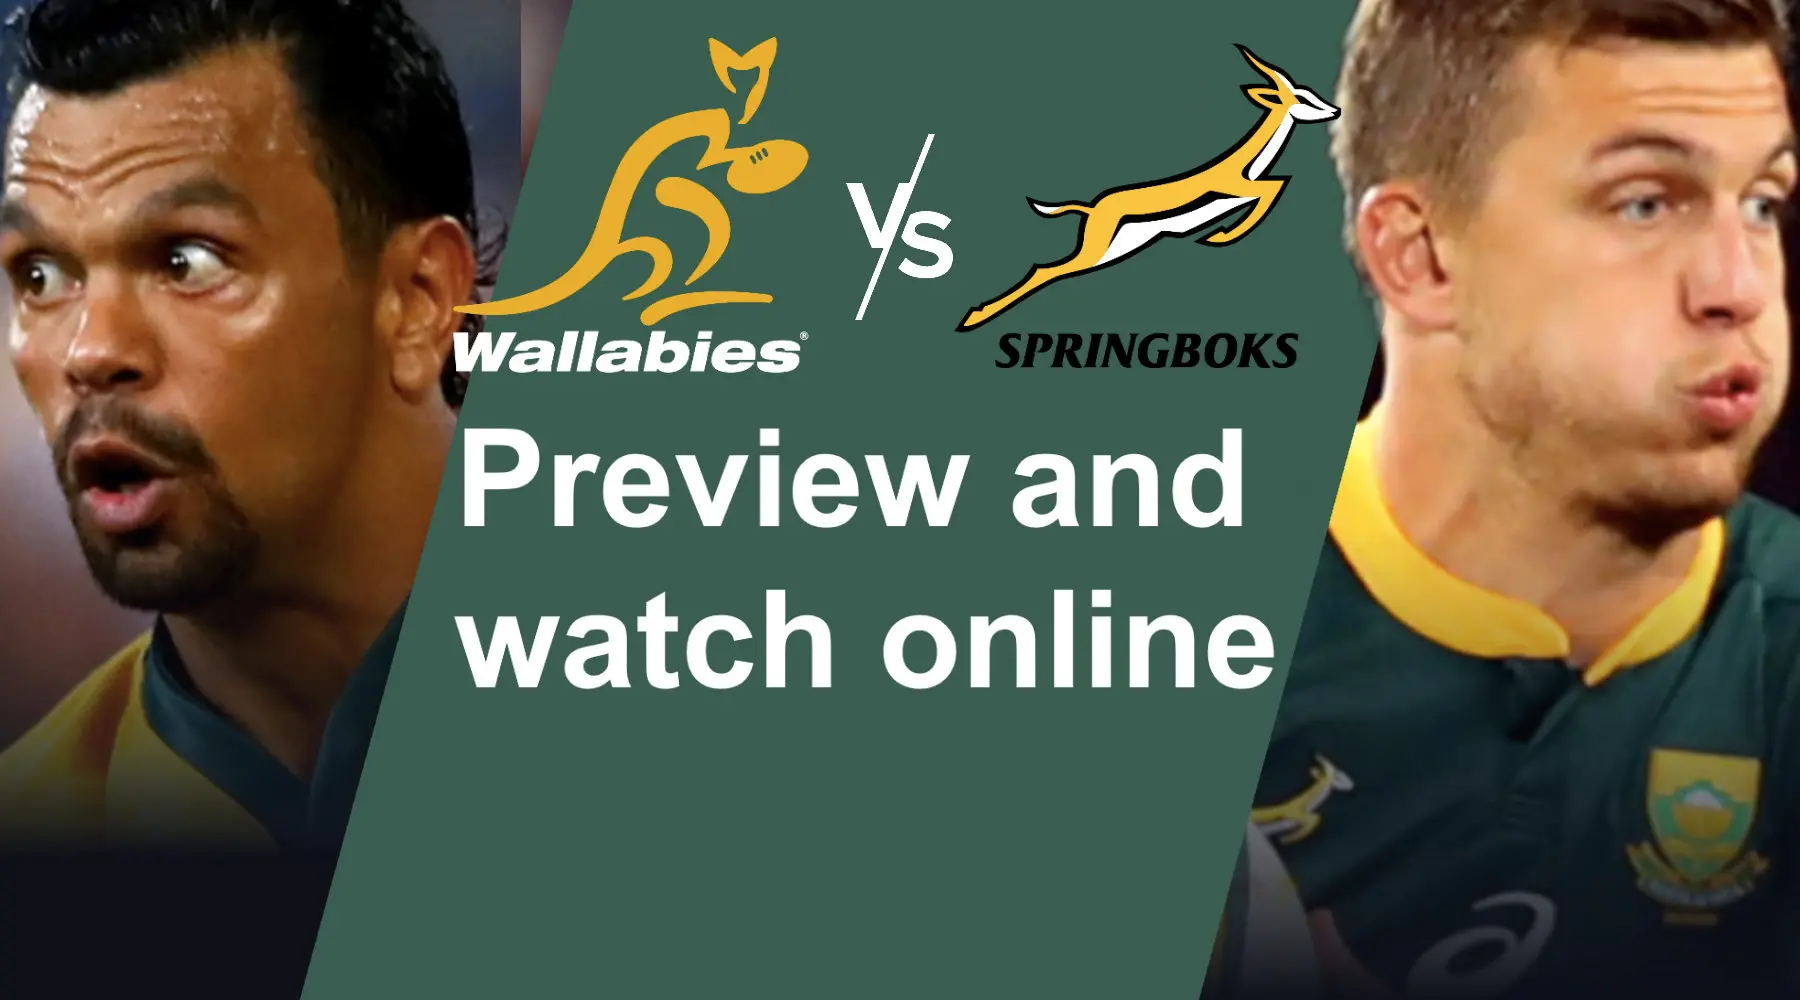 Wallabies vs Springboks 2022 How to watch rugby live and free online